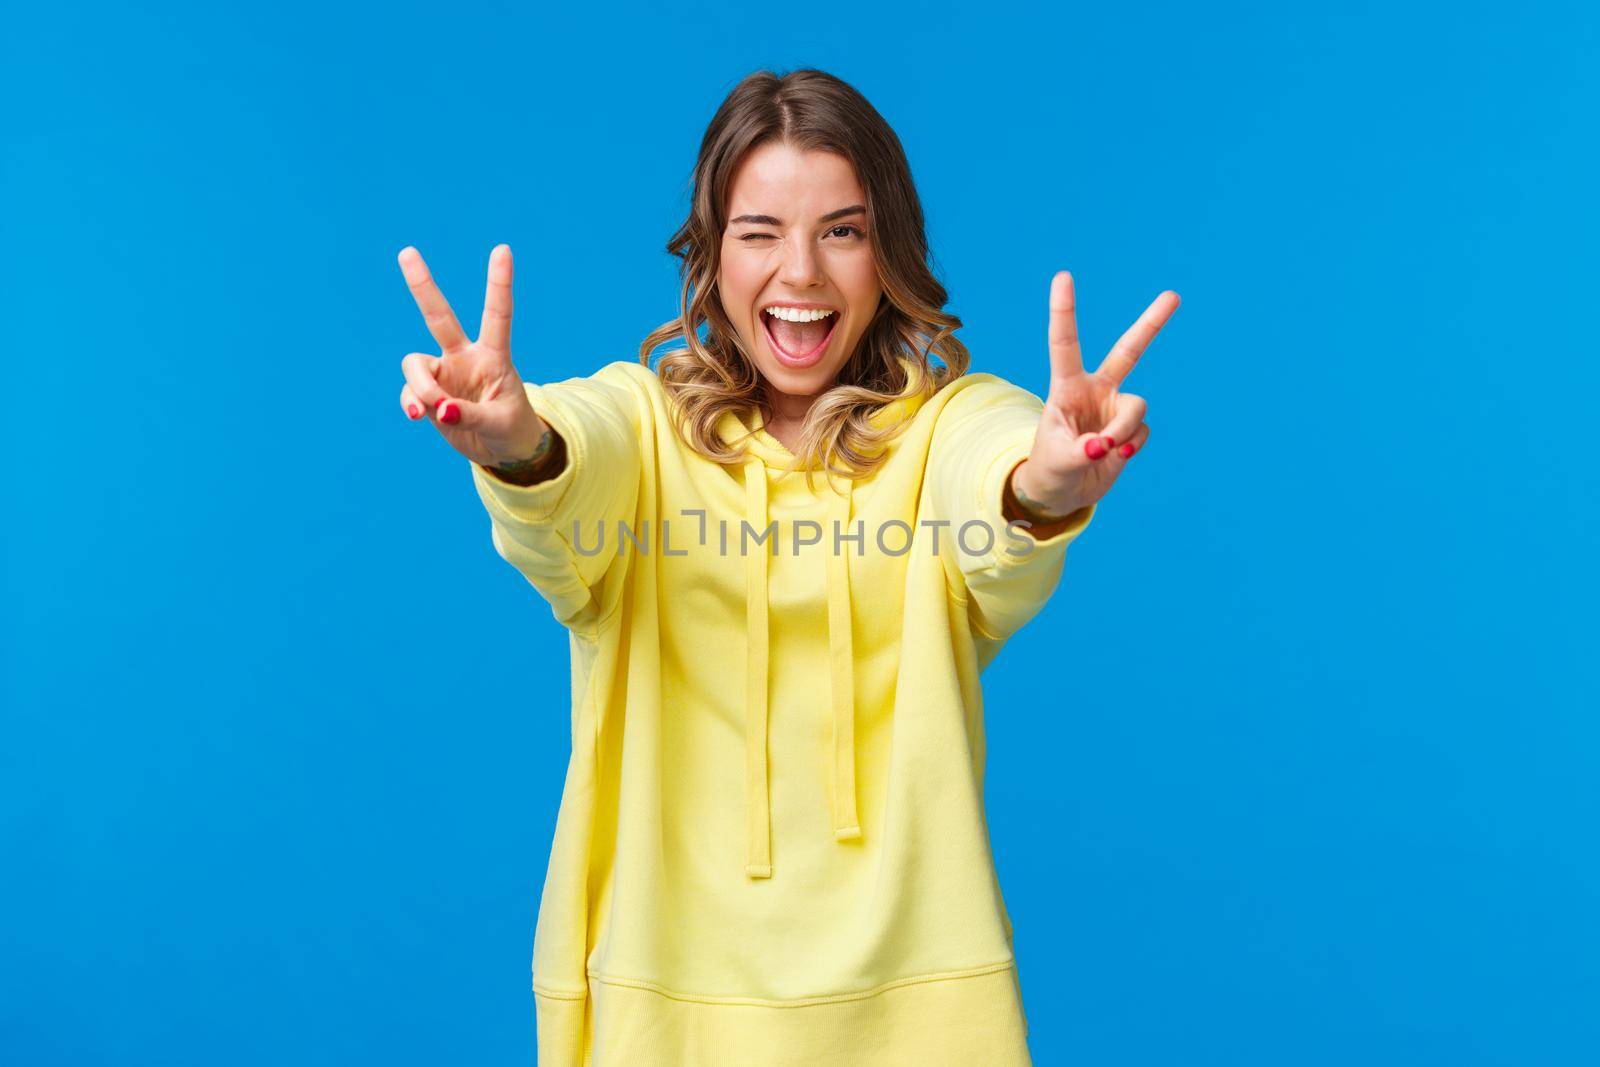 Stay positive. Kawaii joyful, friendly-looking smiling blond woman in yellow hoodie, stretch hands forward with peace gestures, show tongue and grinning, feel excited and upbeat.